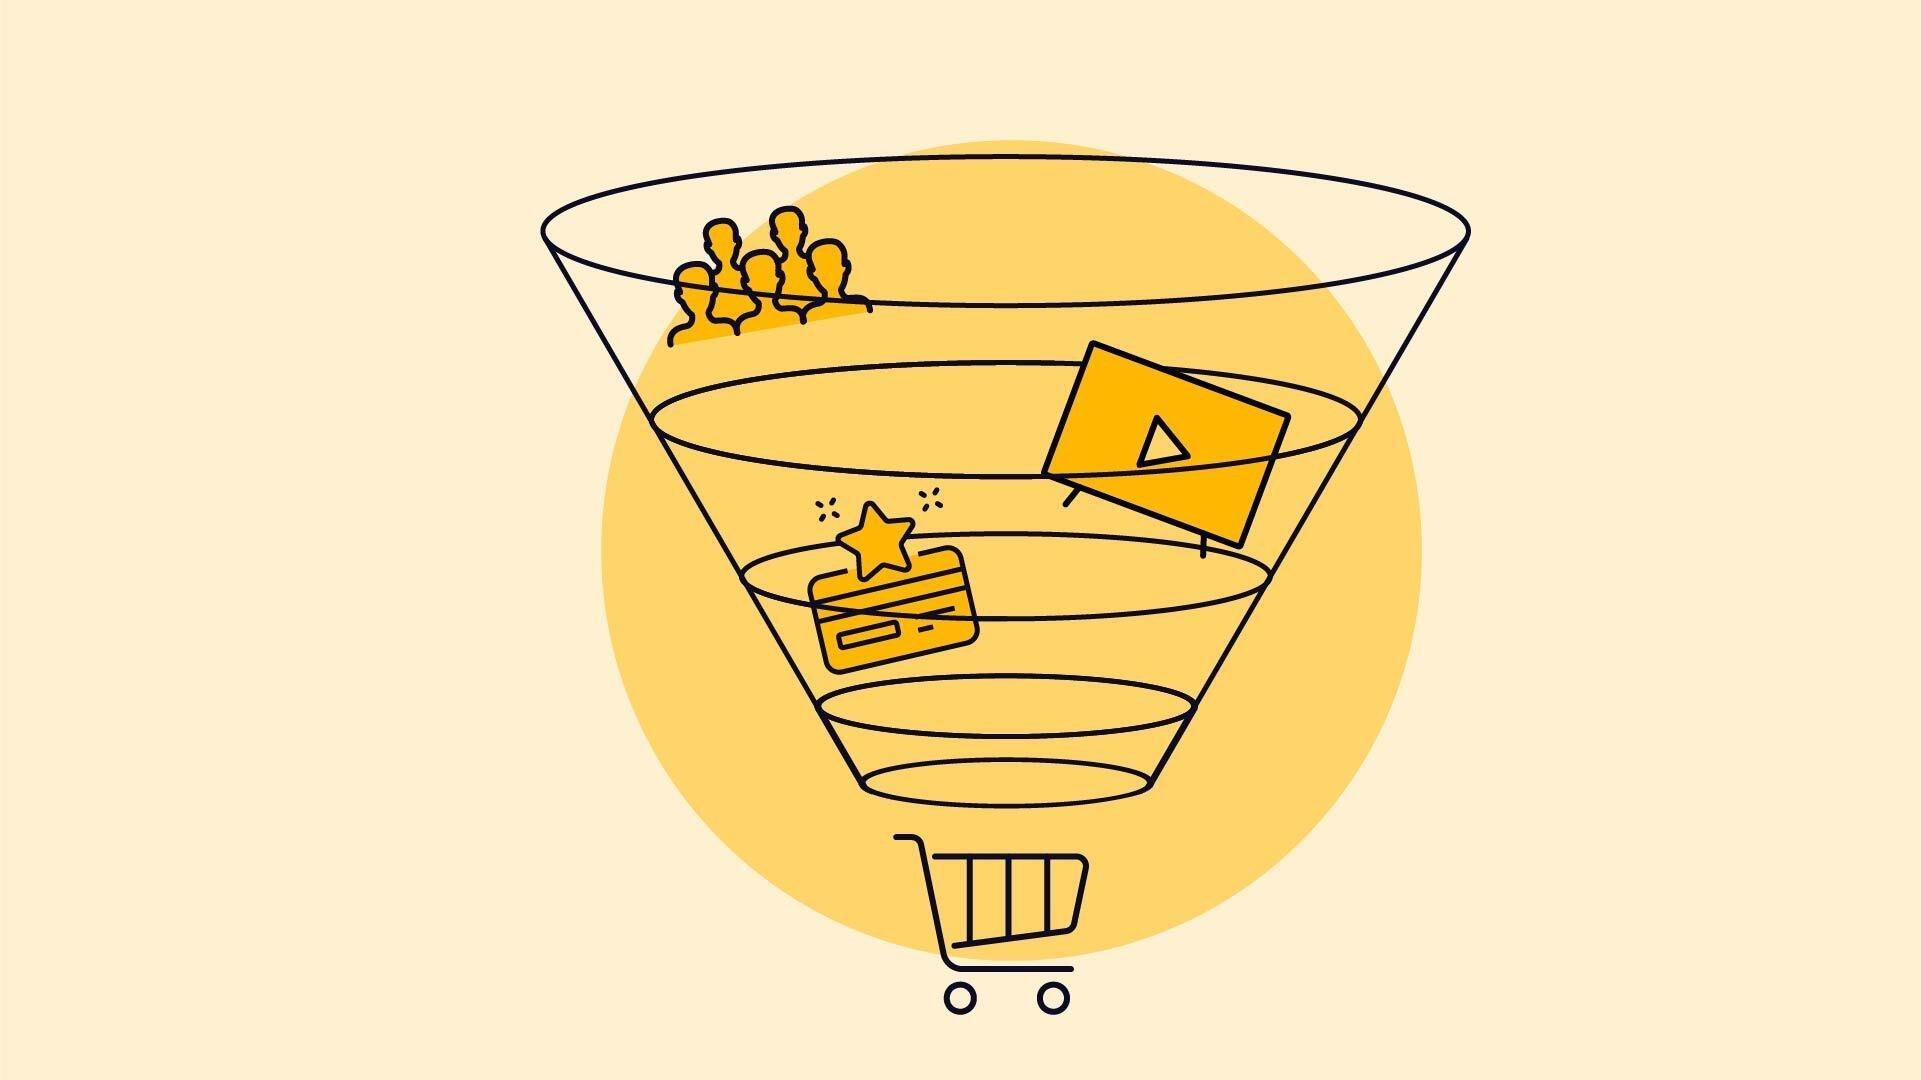 Graphic shows a yellow circle featuring a funnel with icons of a small crowd, web browser, and media play button above a shopping cart.